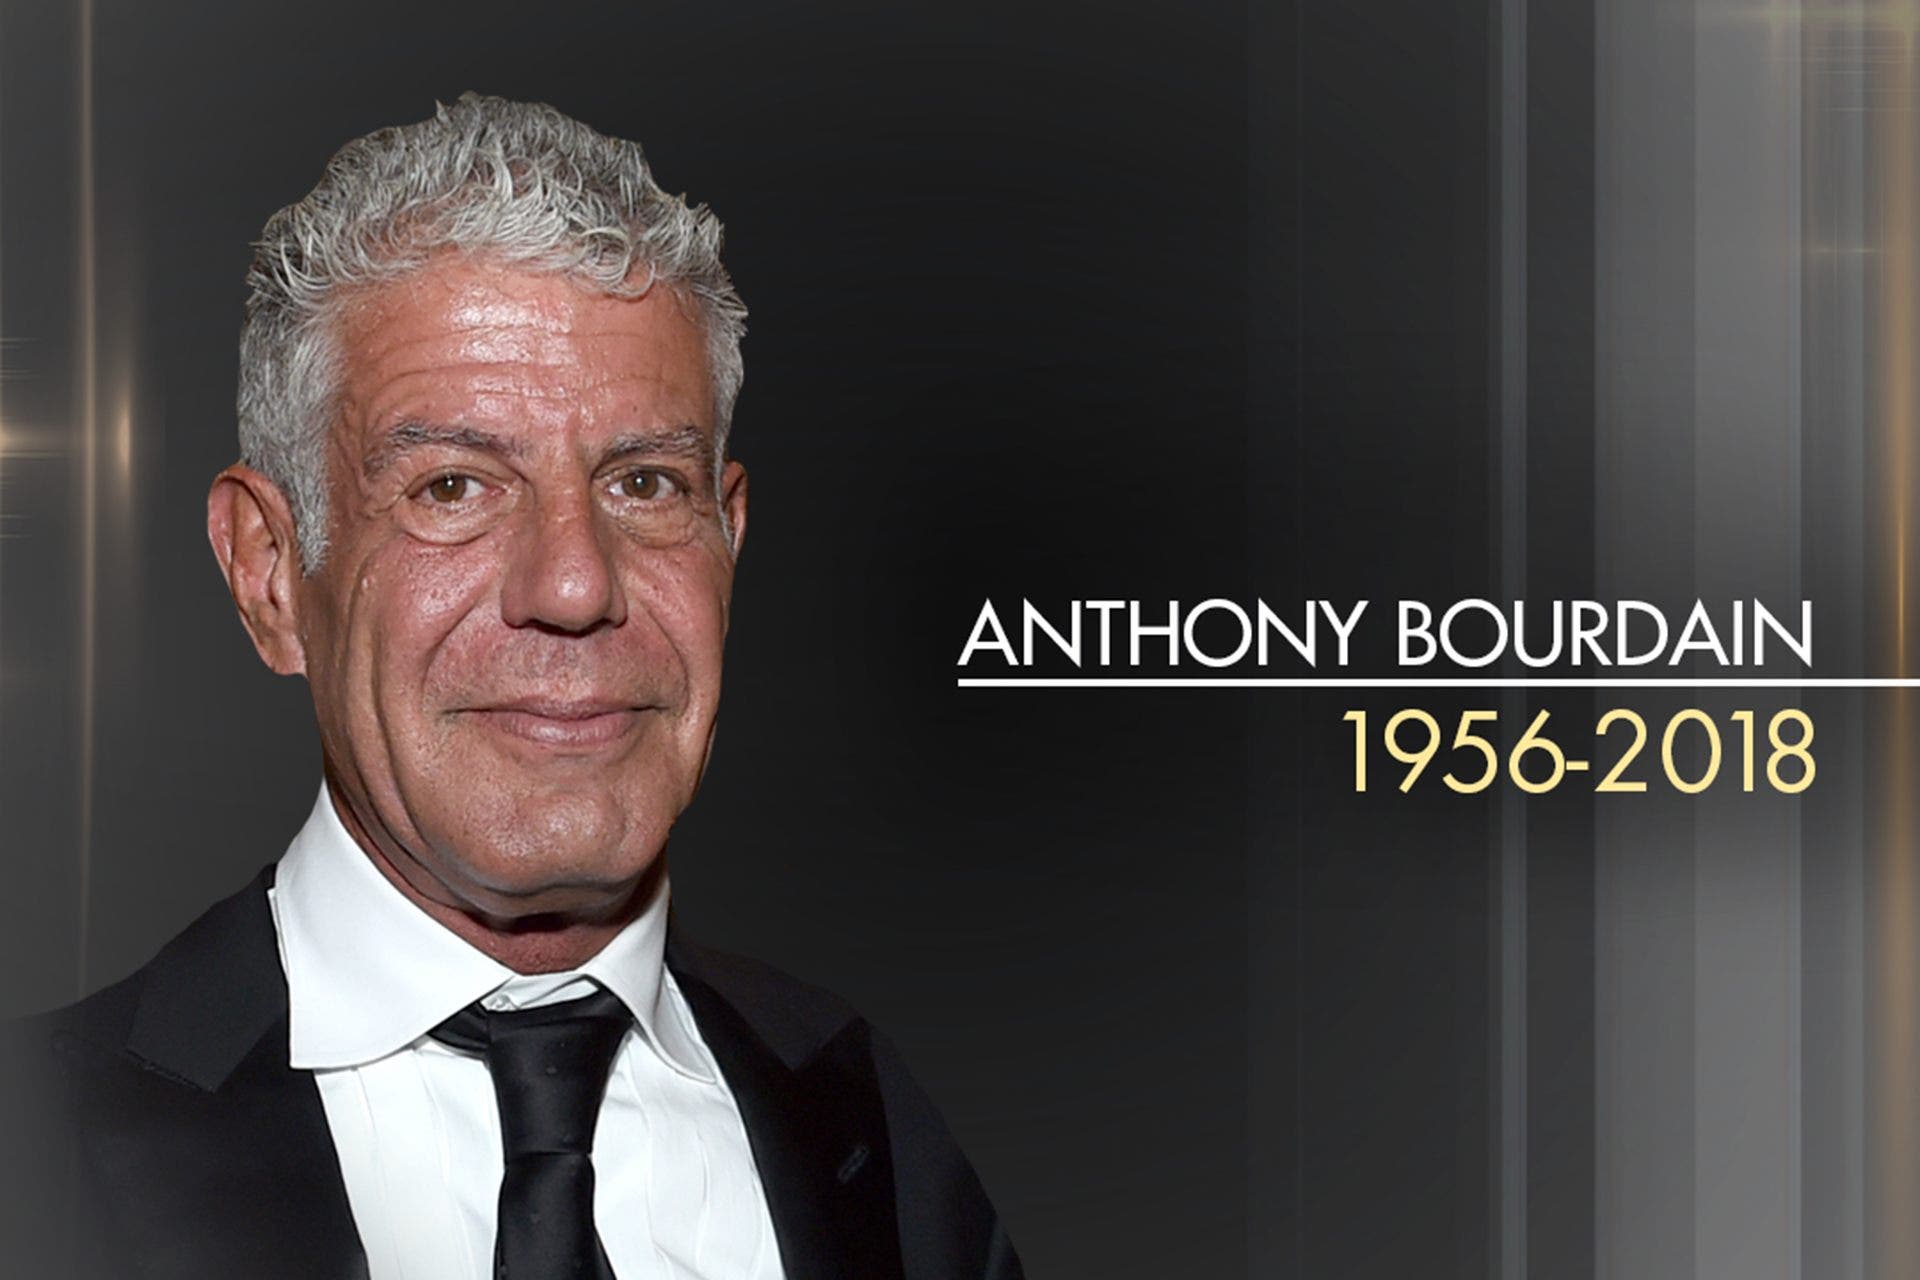 Anthony Bourdain’s life in pictures